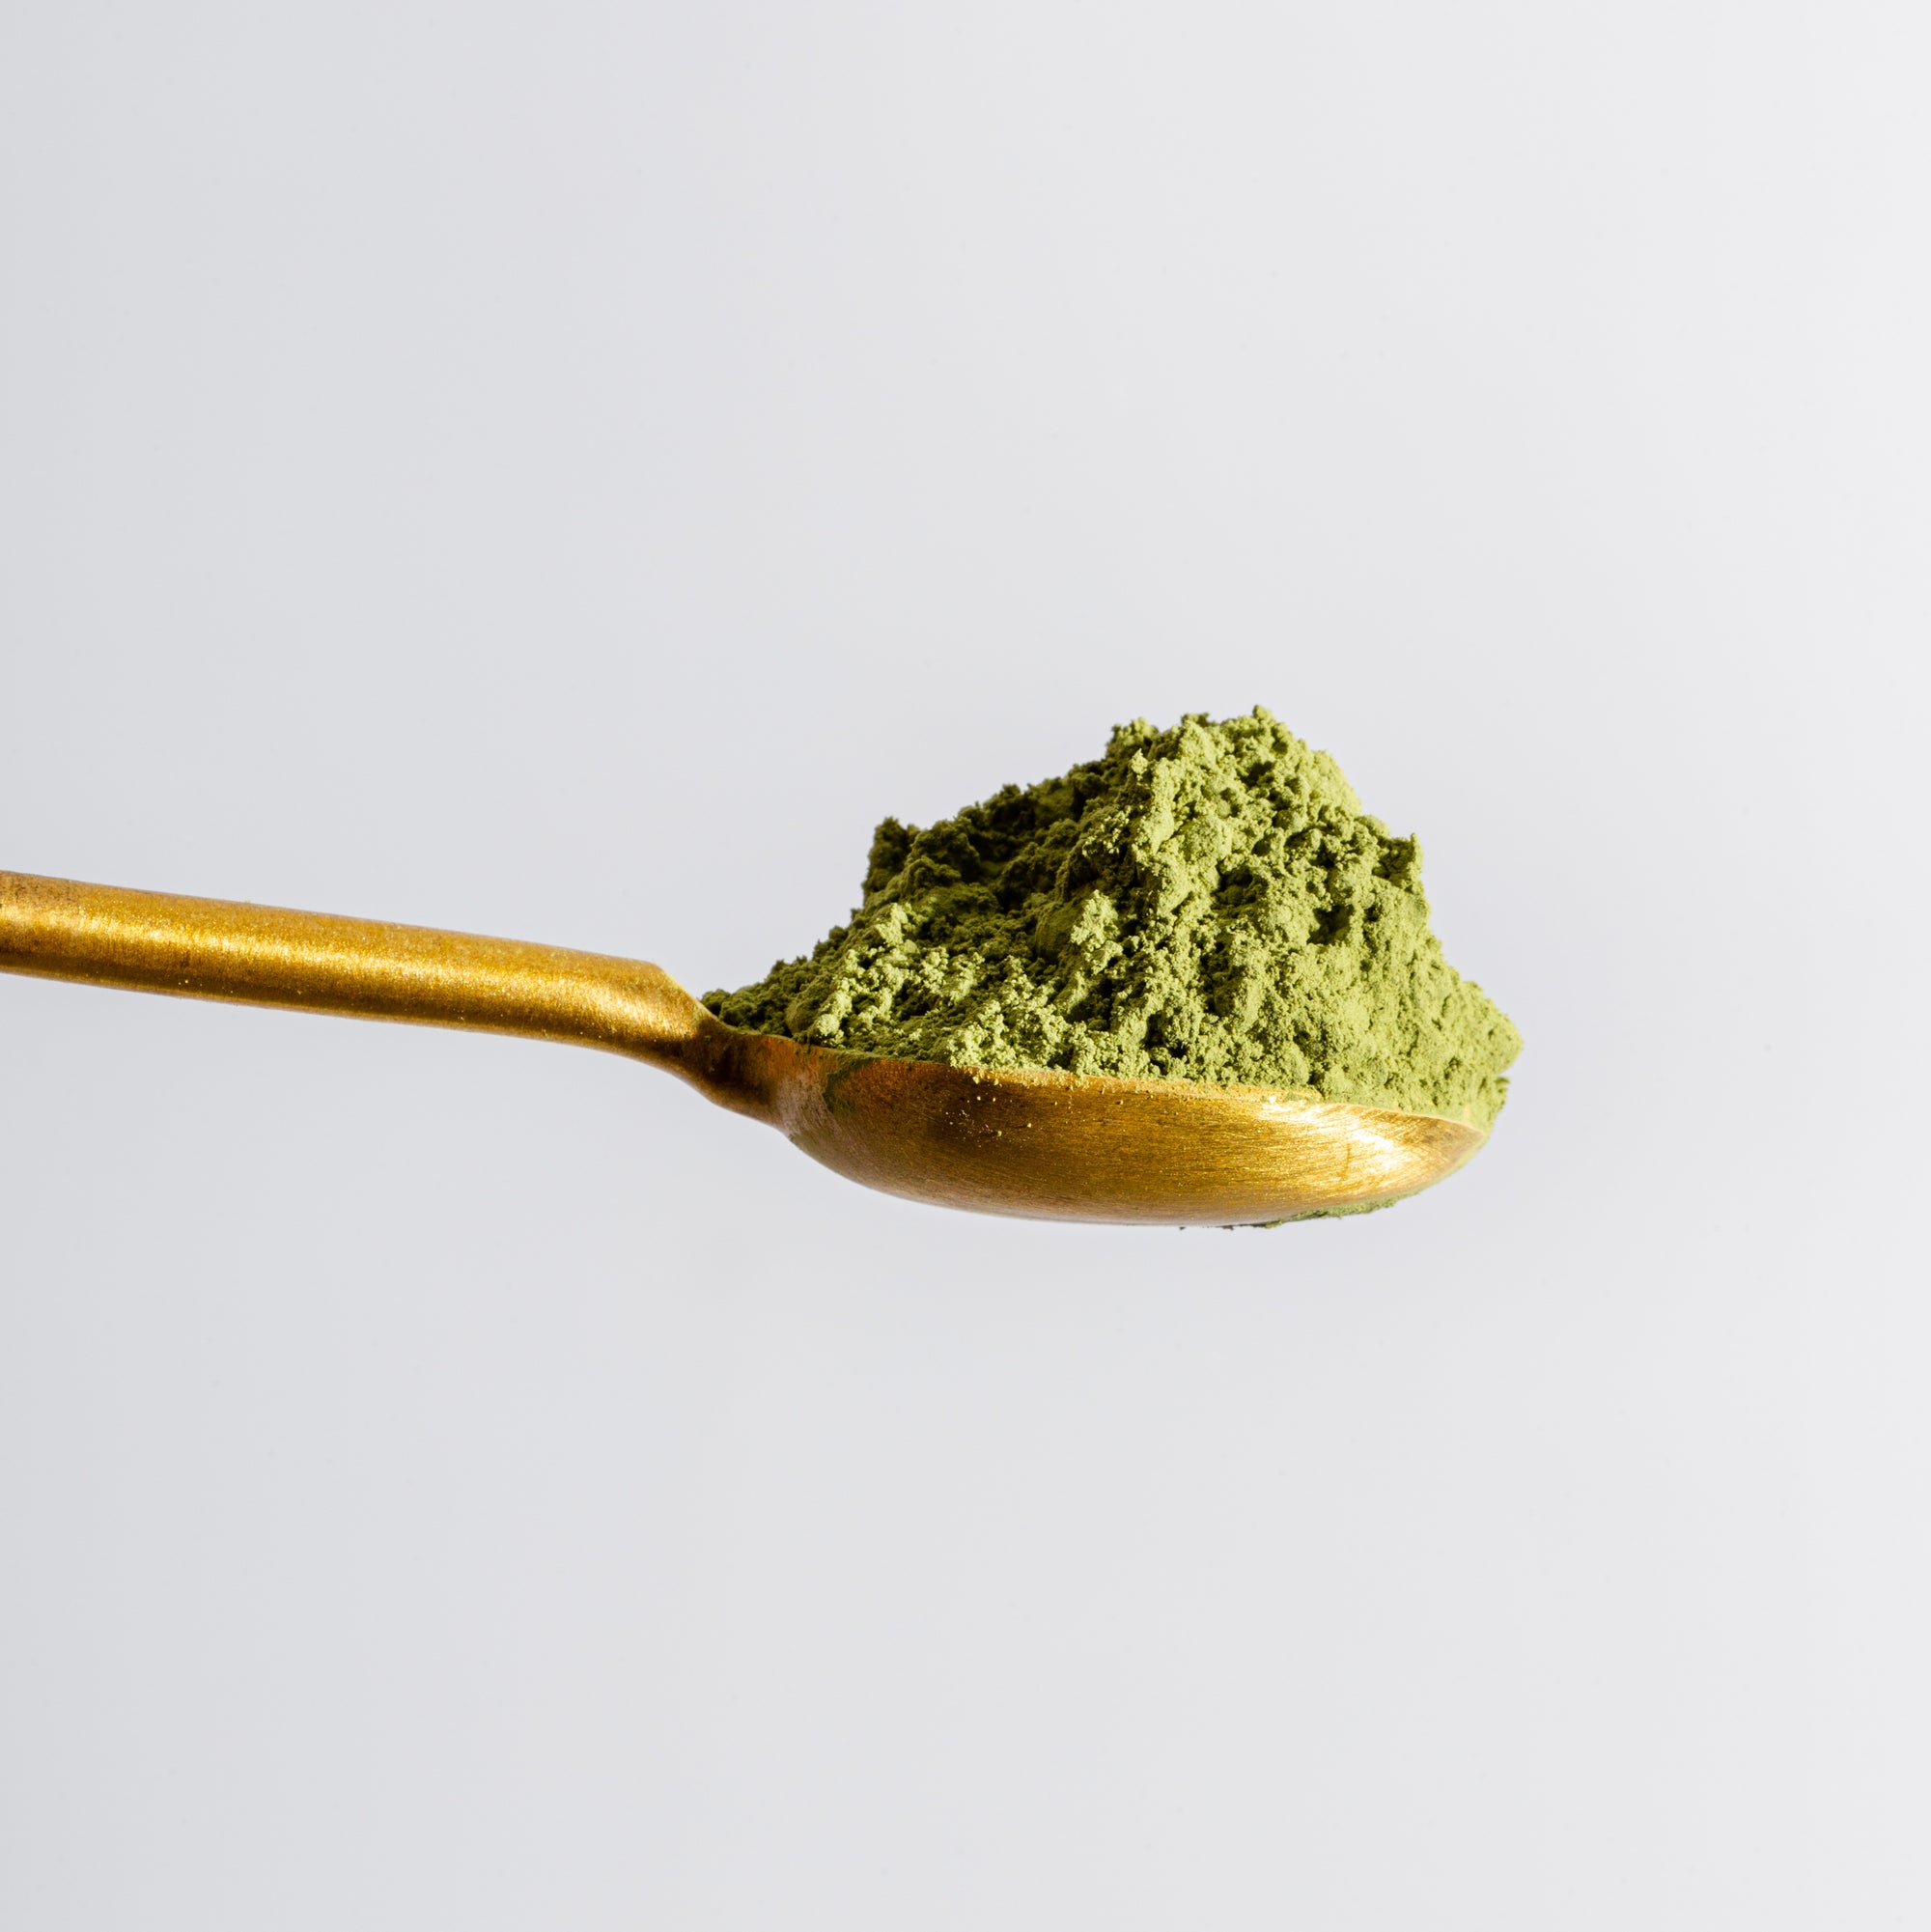 Gold metal spoon with green matcha powder